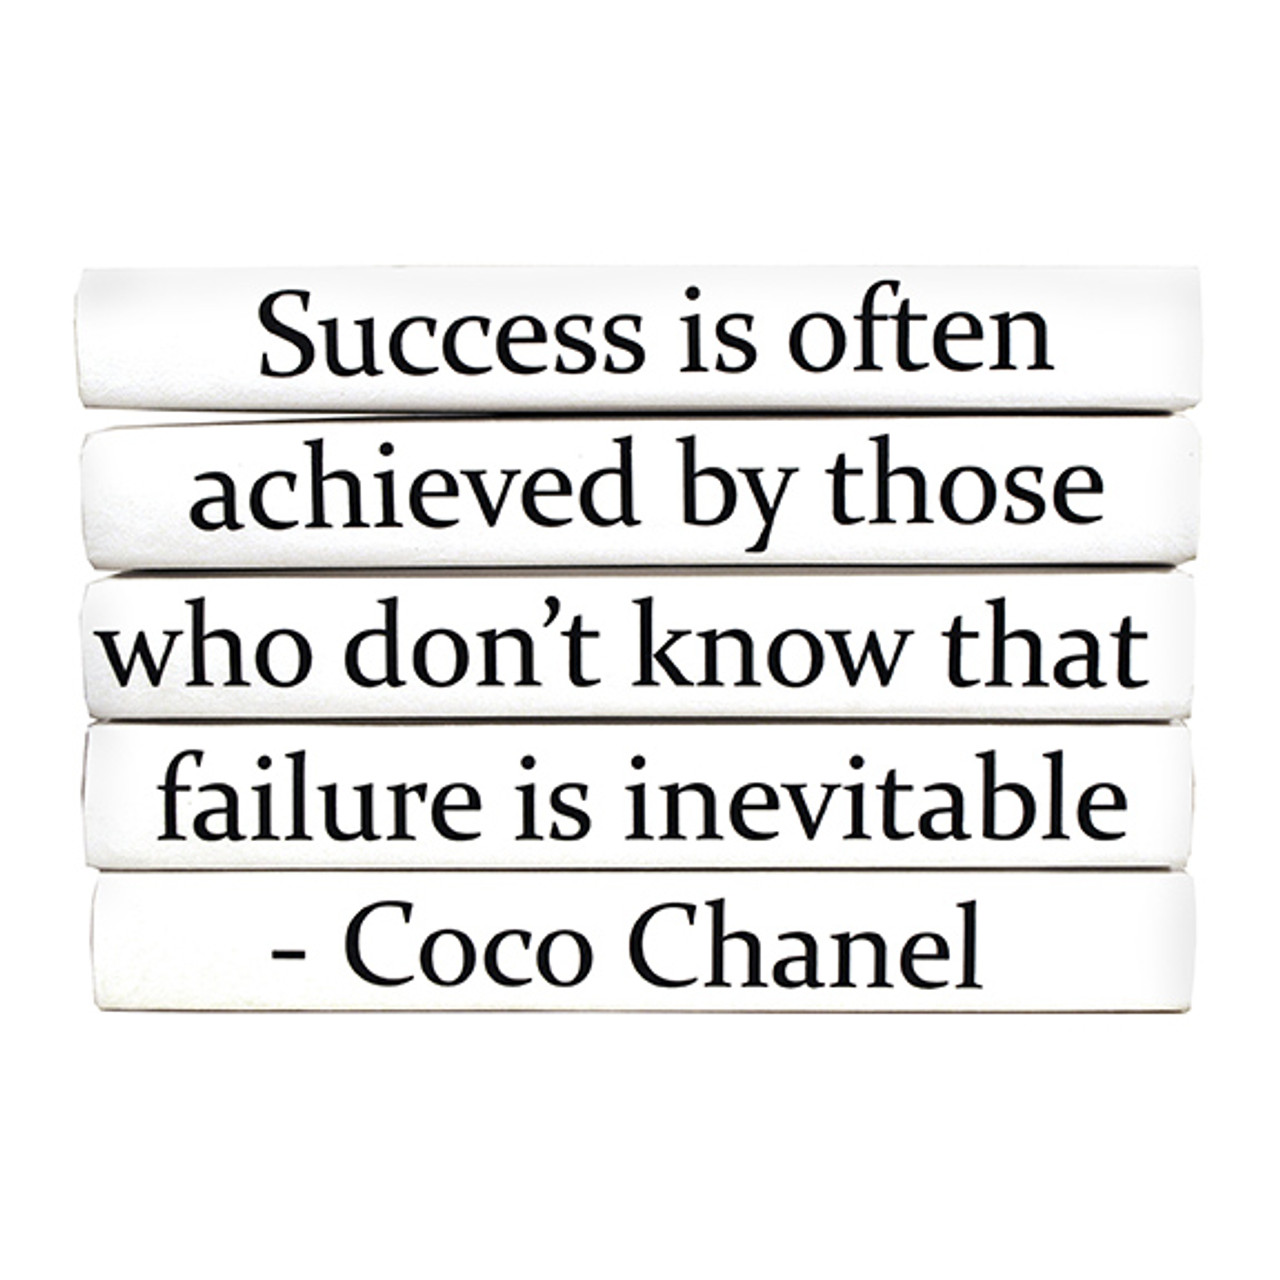 5 Vol. Coco Chanel Success is often achieved quote / Black Covers /  9.5 wide / Approx. 6.25 tall